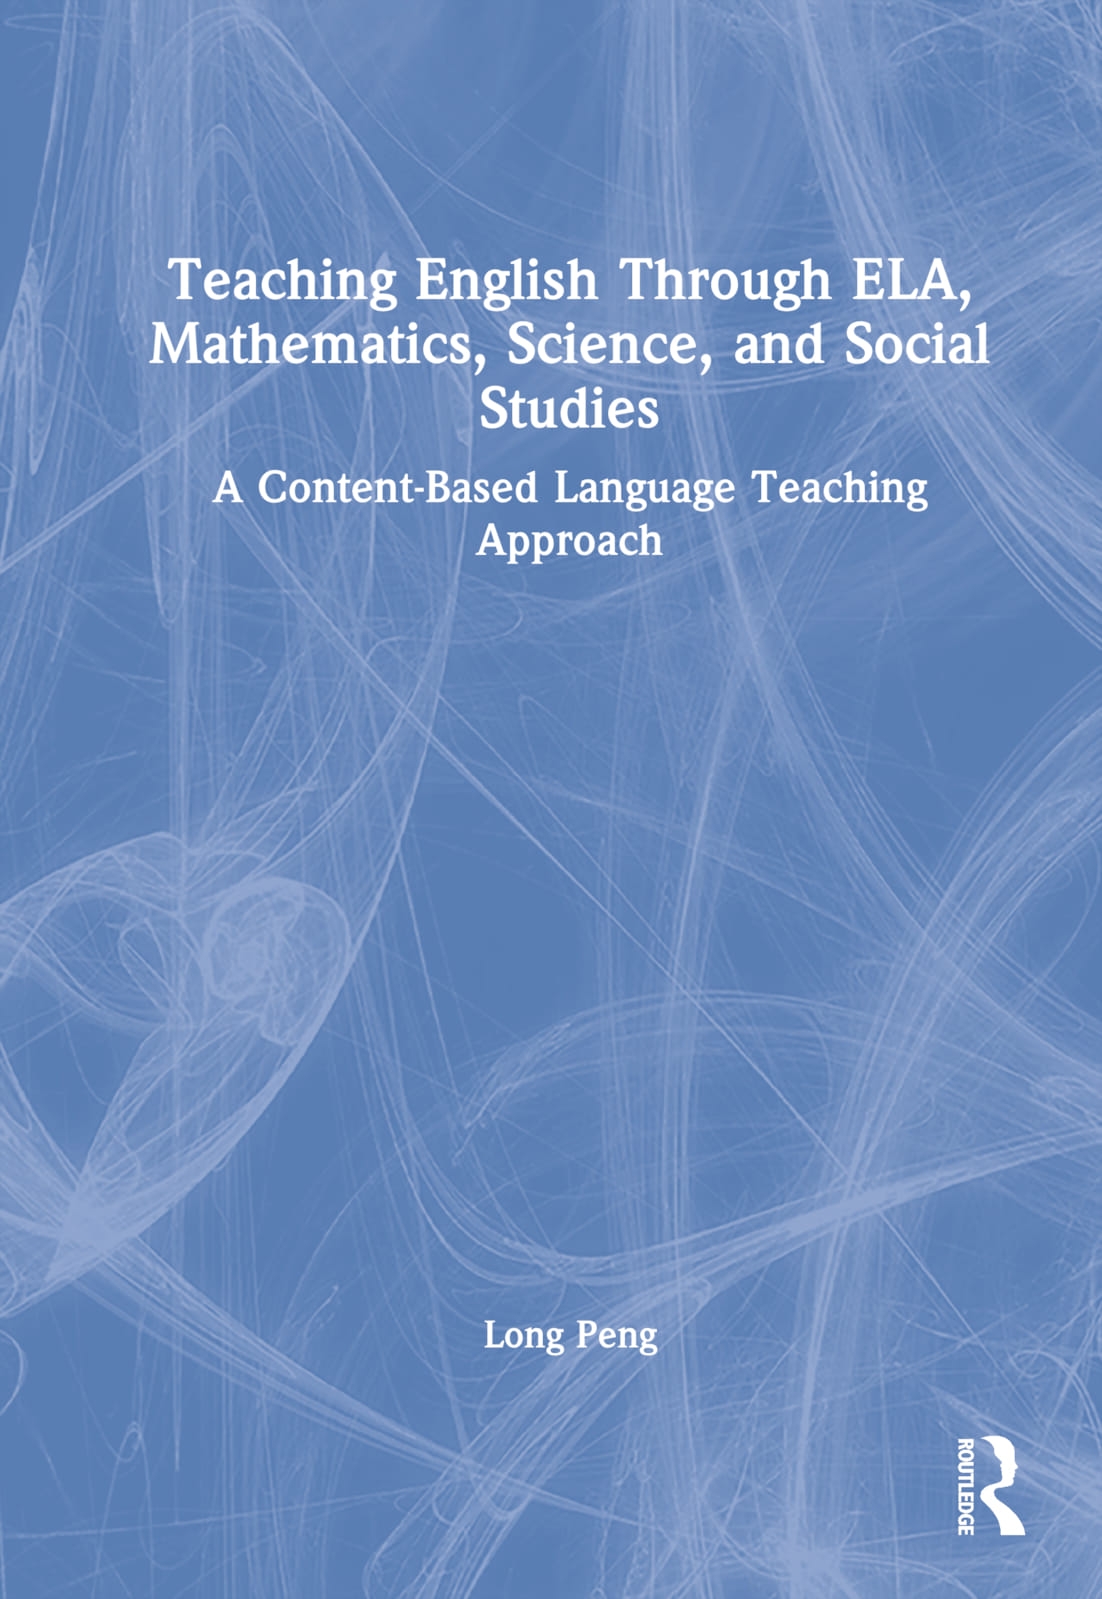 Teaching English Through Ela, Mathematics, Science, and Social Studies: A Content-Based Language Teaching Approach